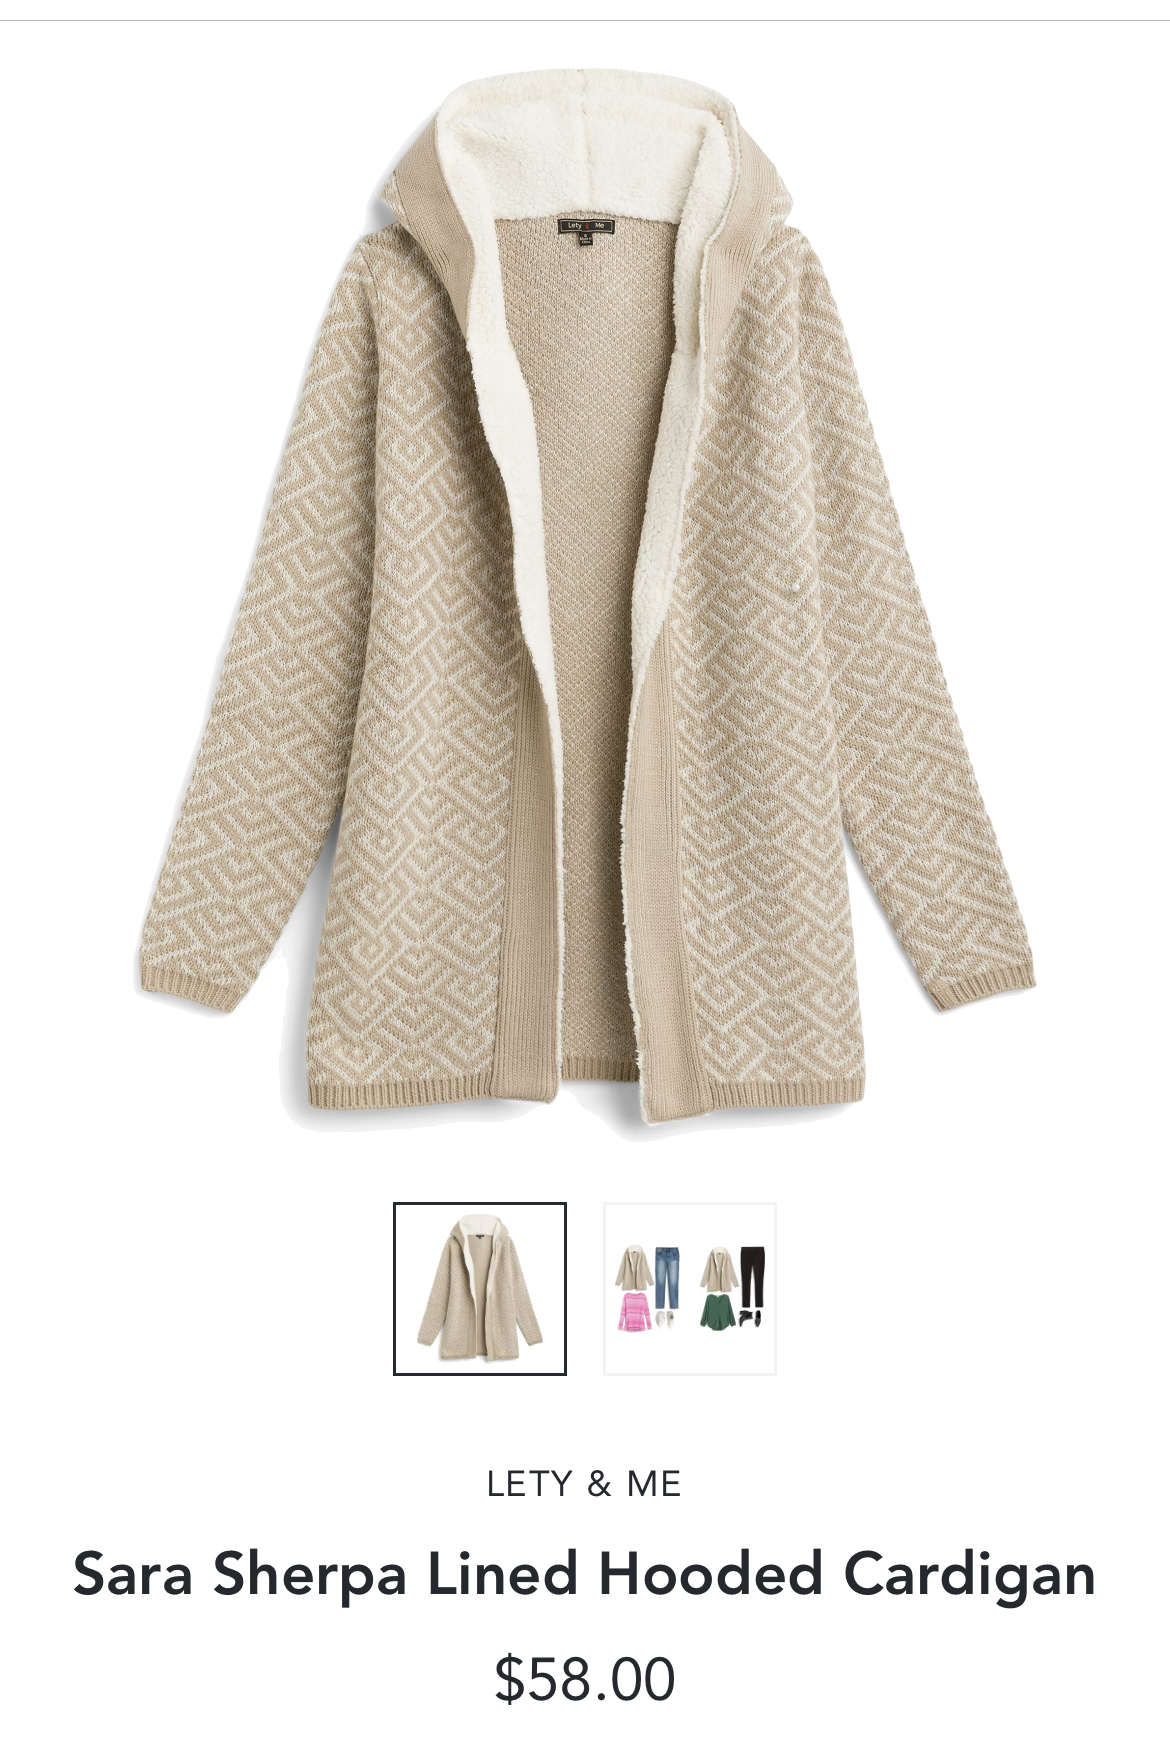 Stitch Fix Lety & Me Sara Sherpa Lined Hooded Cardigan